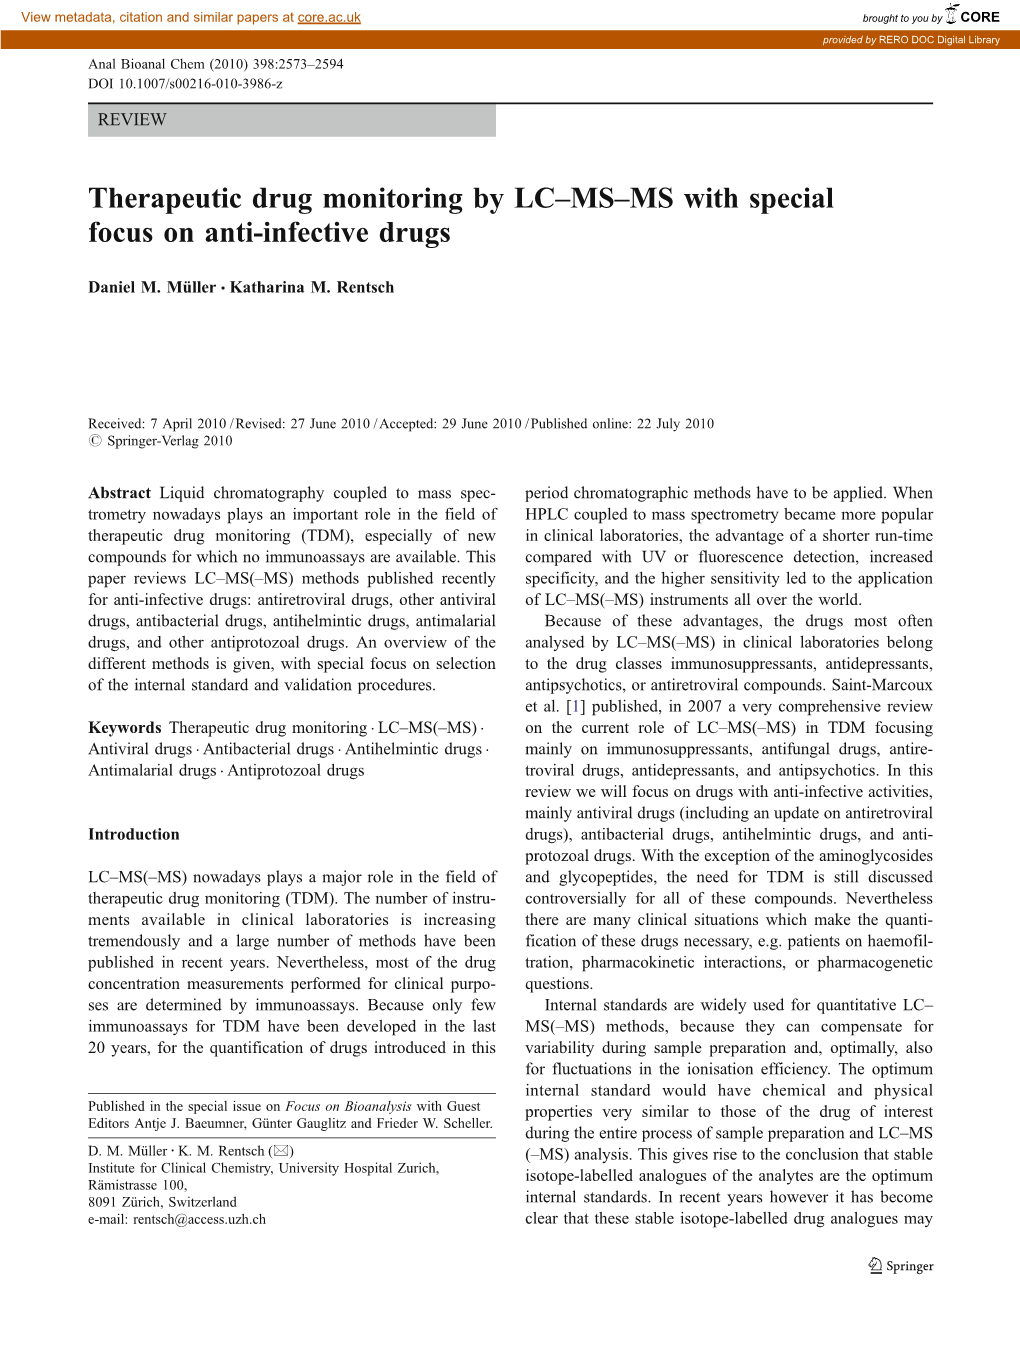 Therapeutic Drug Monitoring by LC–MS–MS with Special Focus on Anti-Infective Drugs